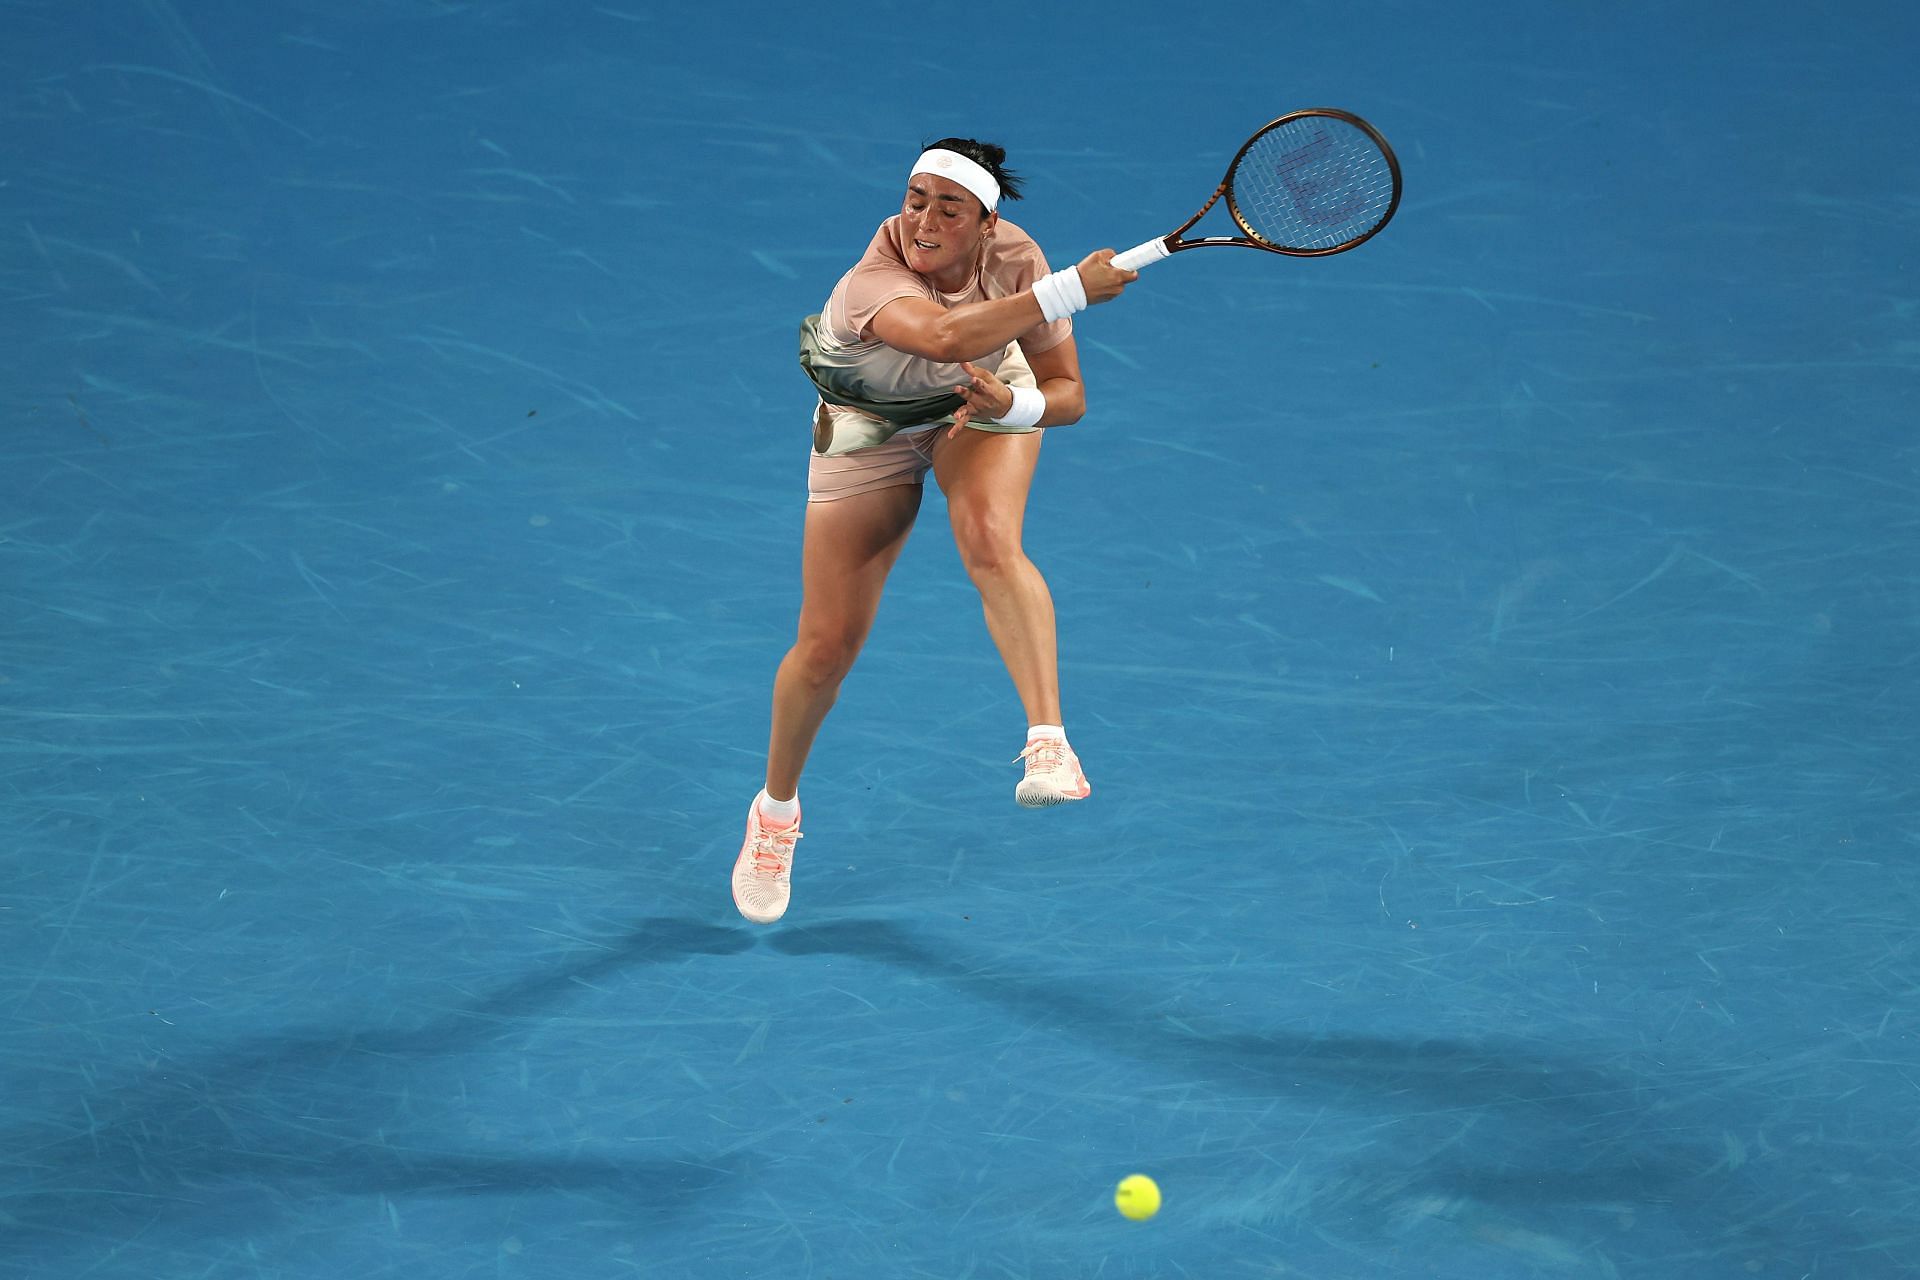 Ons Jabeur in action at the Australian Open